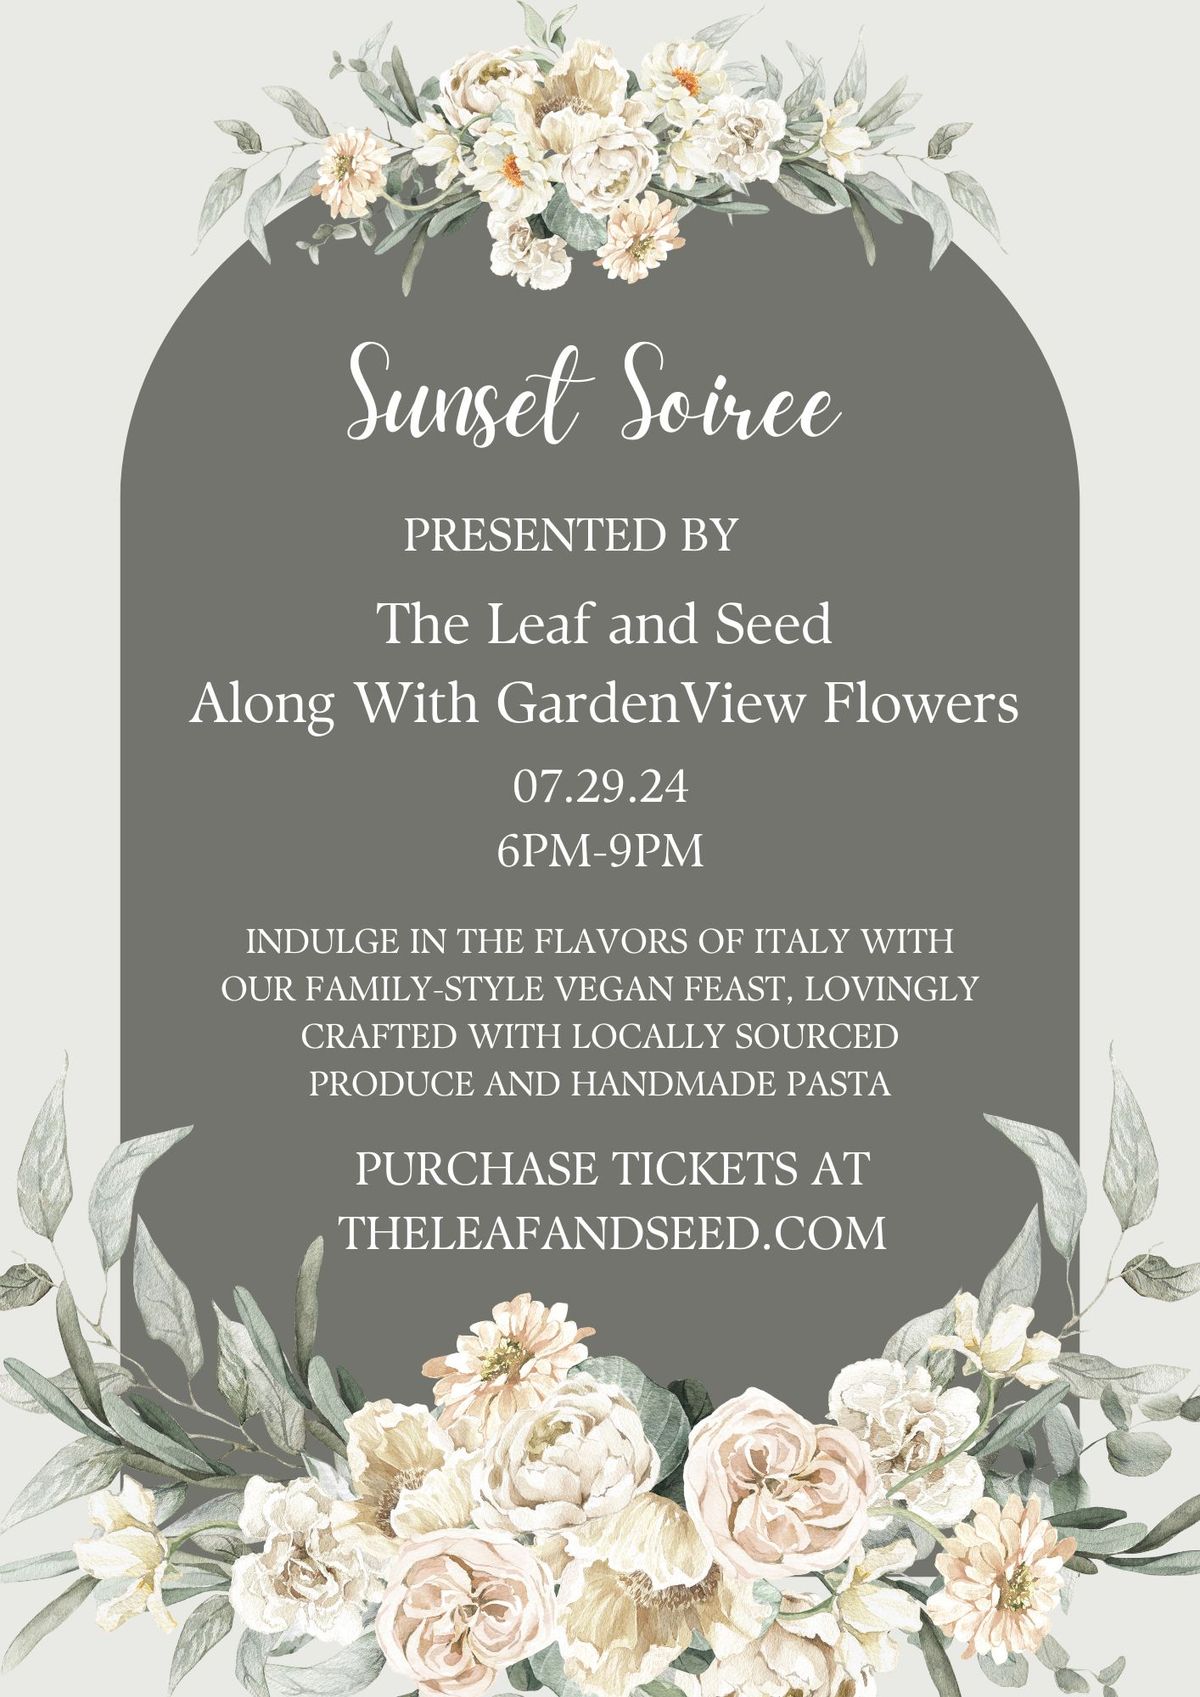 Sunset Soiree at Gardenview Flowers 